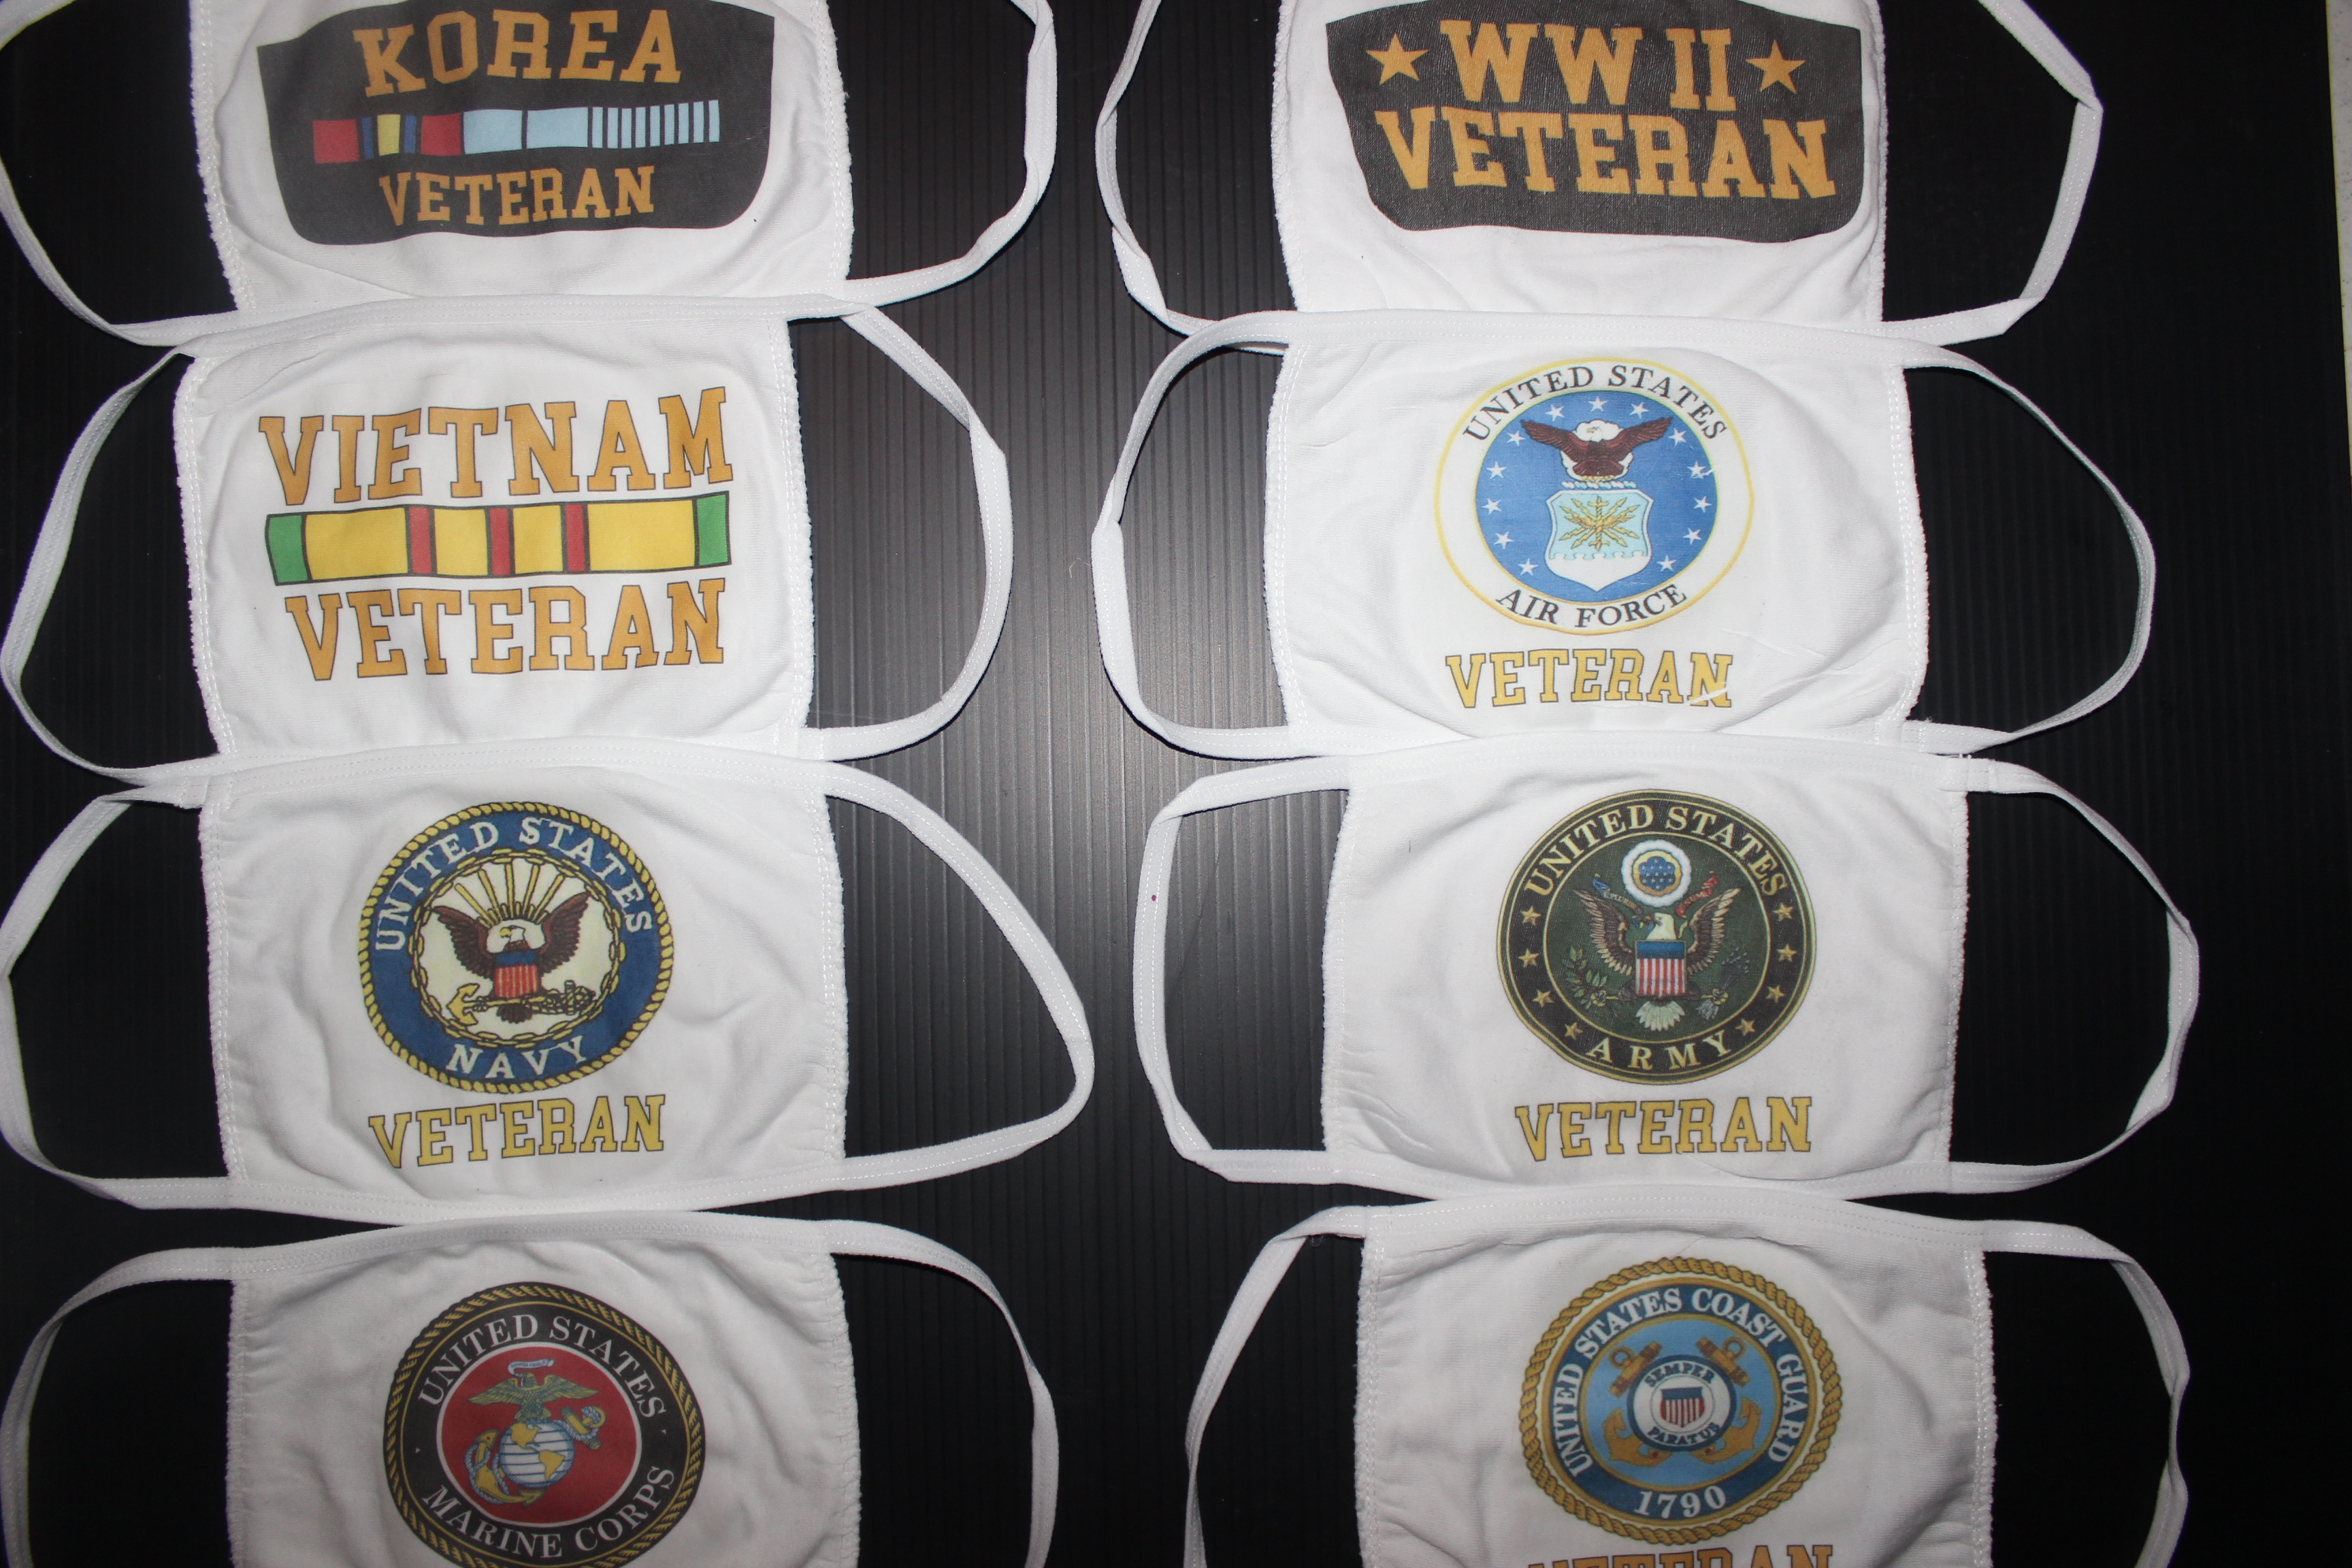 Veteran mask made with sublimation printing